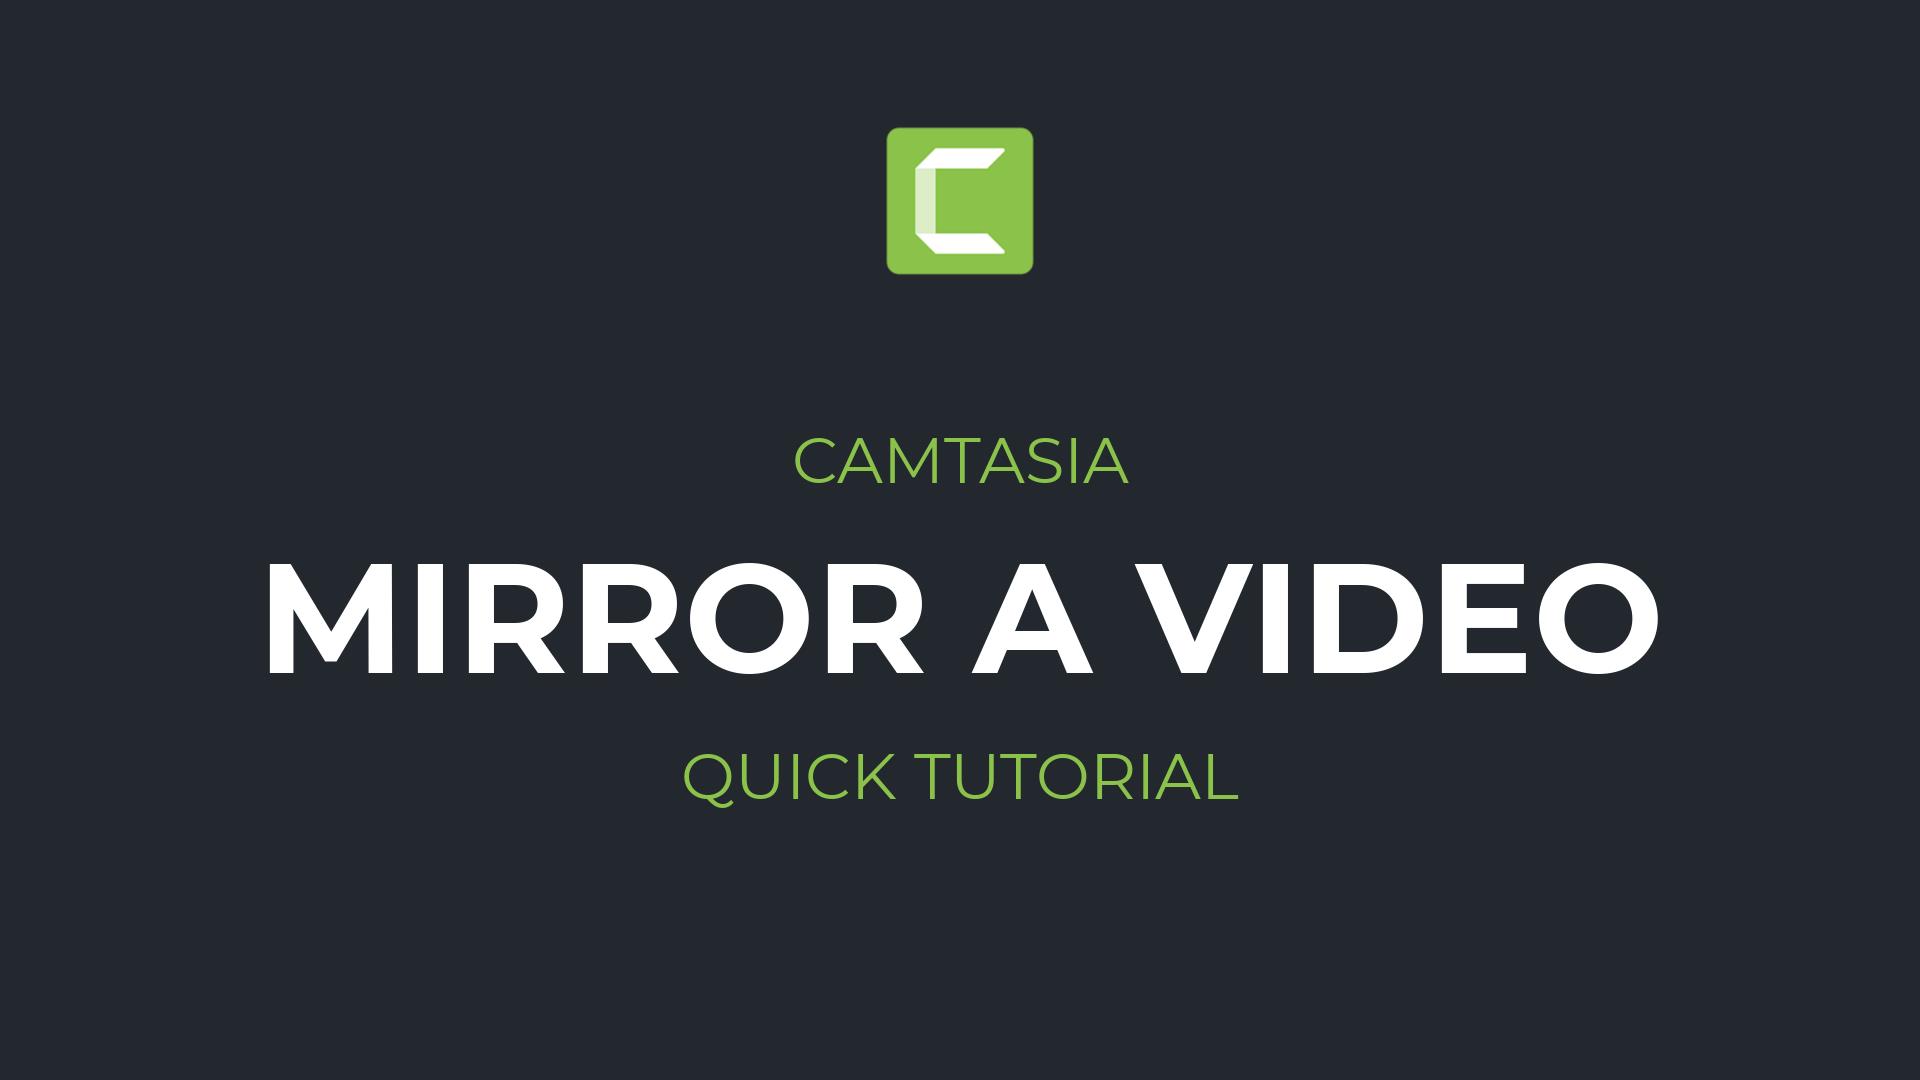 How to mirror a video in Camtasia